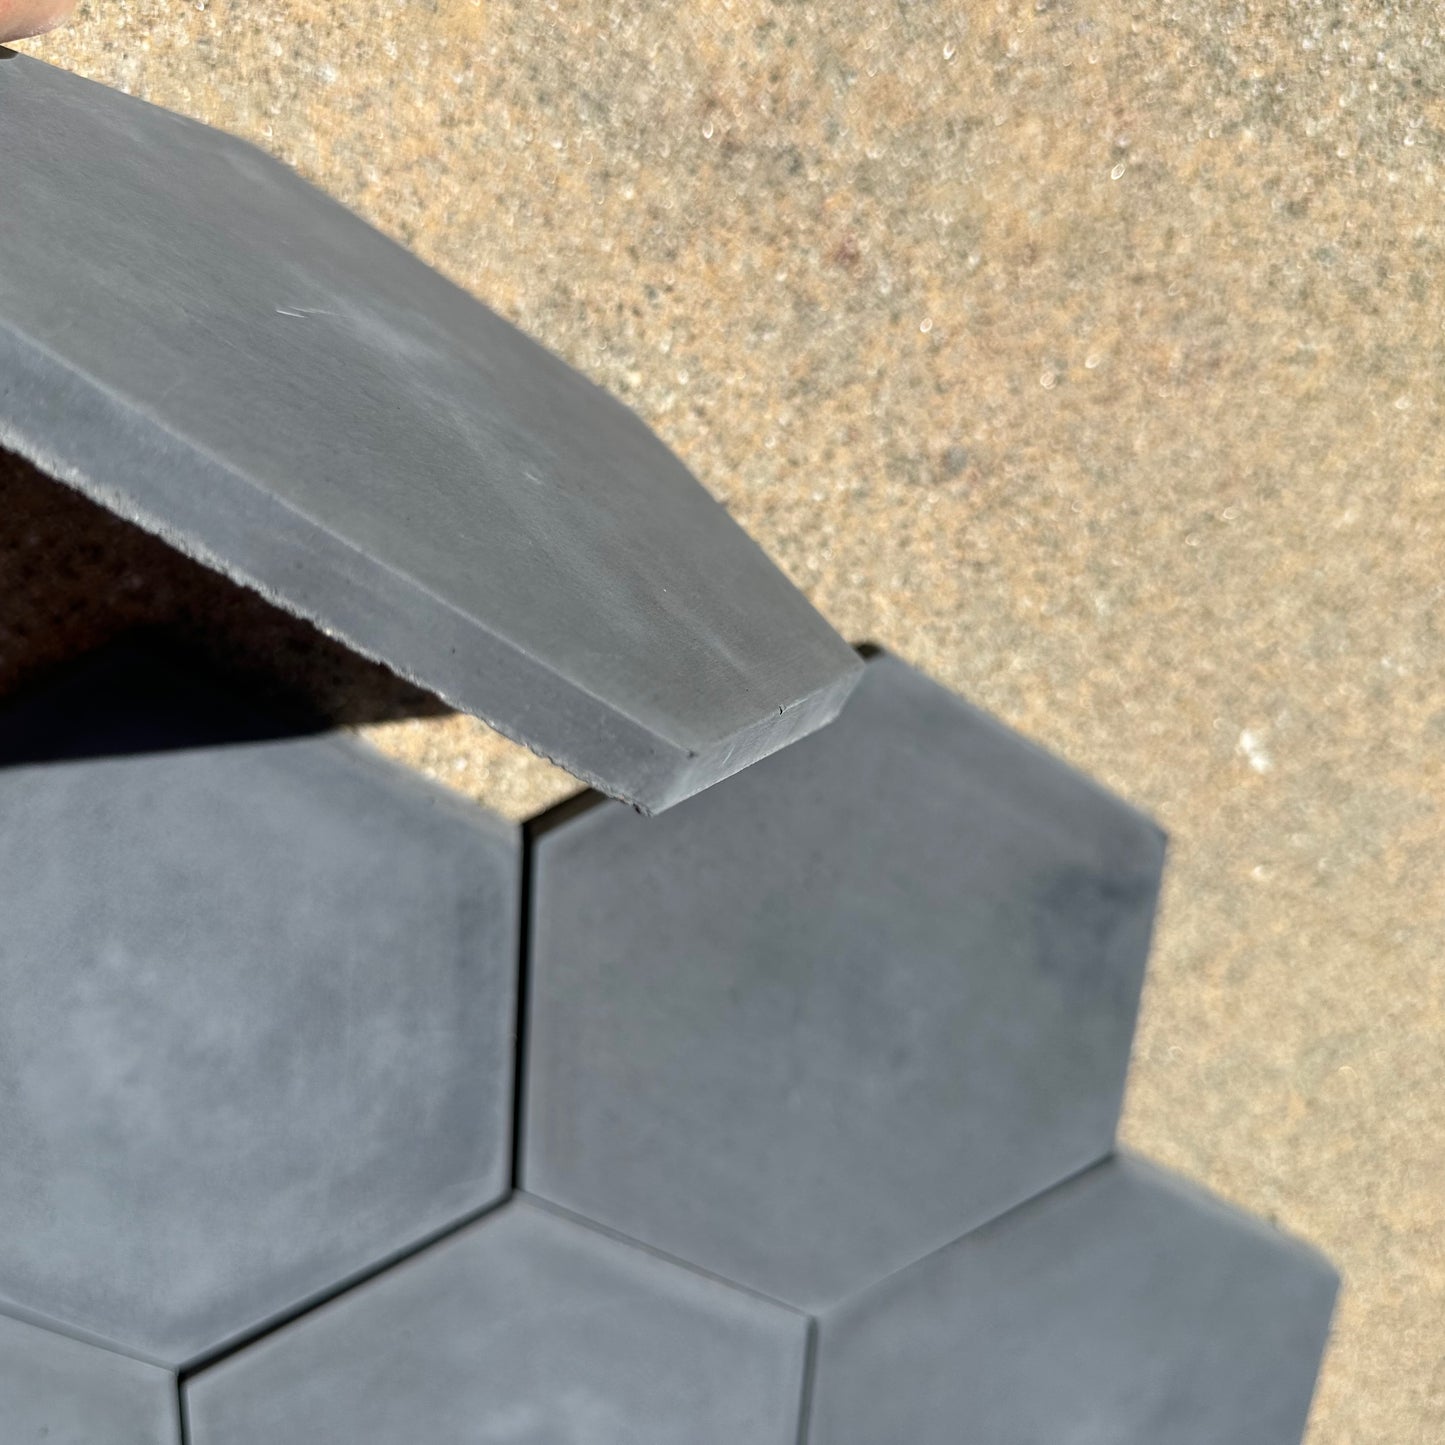 Tesselle | Concord Graphite 7"x6" Hexagonal Cement Wall Tile